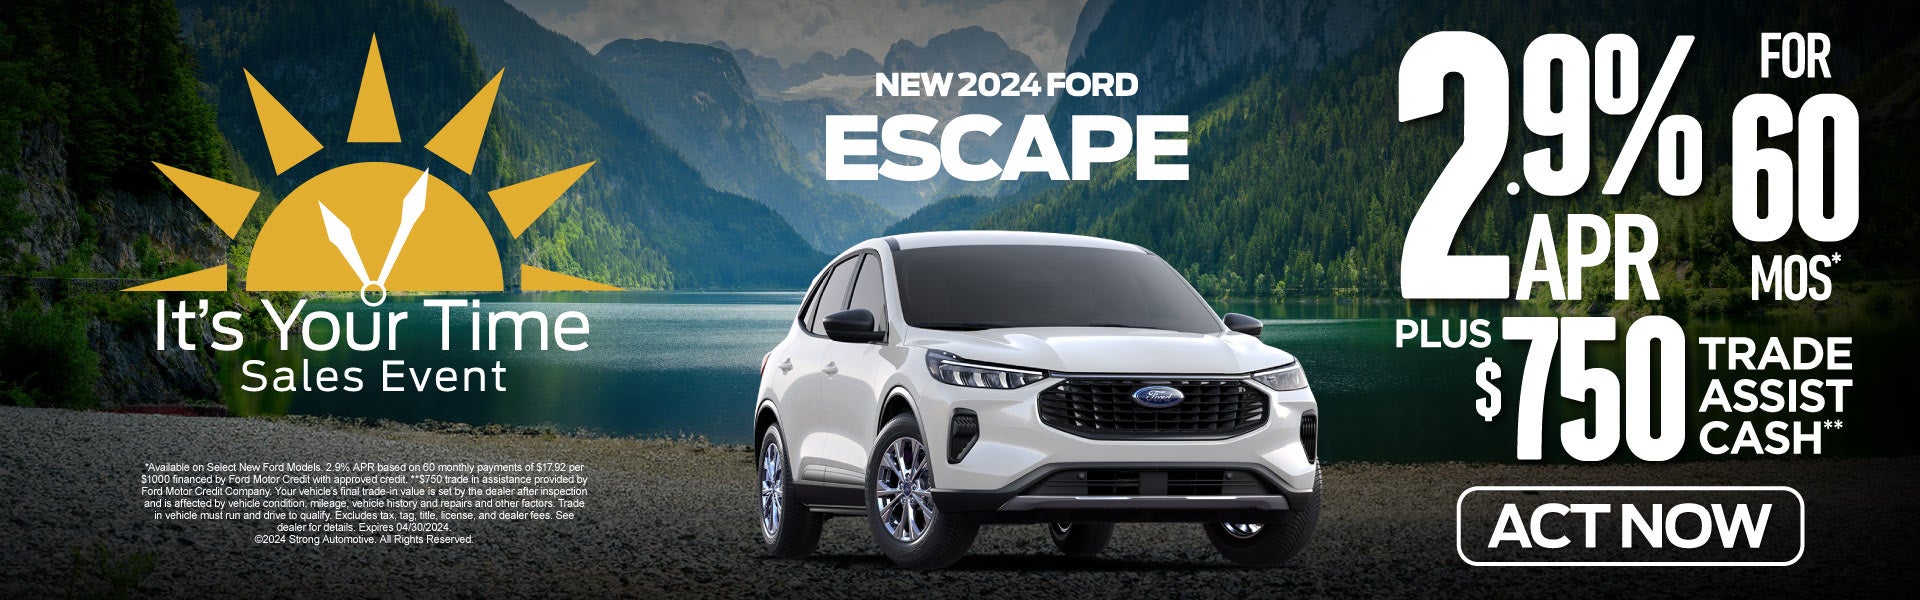 2024 Ford escape 2.9% apr for 60 mos. - act now